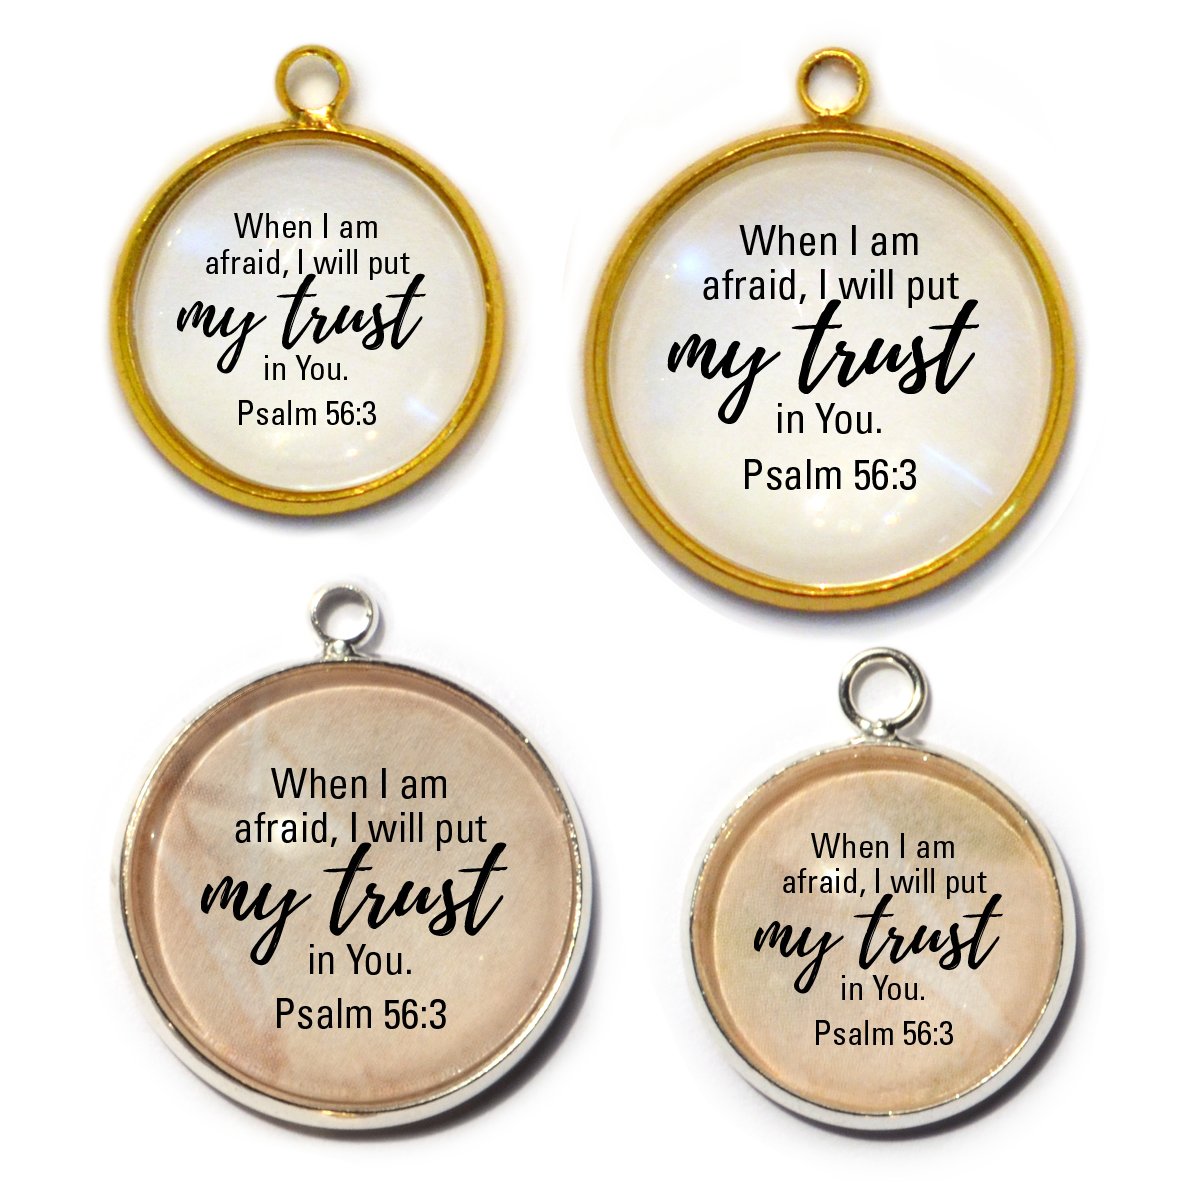 Psalm 56:3 Glass Charms for DIY Christian Jewelry & Crafts - Handcrafted, Inspirational Scripture Charms - Pendants, Stones & Charms - Bijou Her -  -  - 